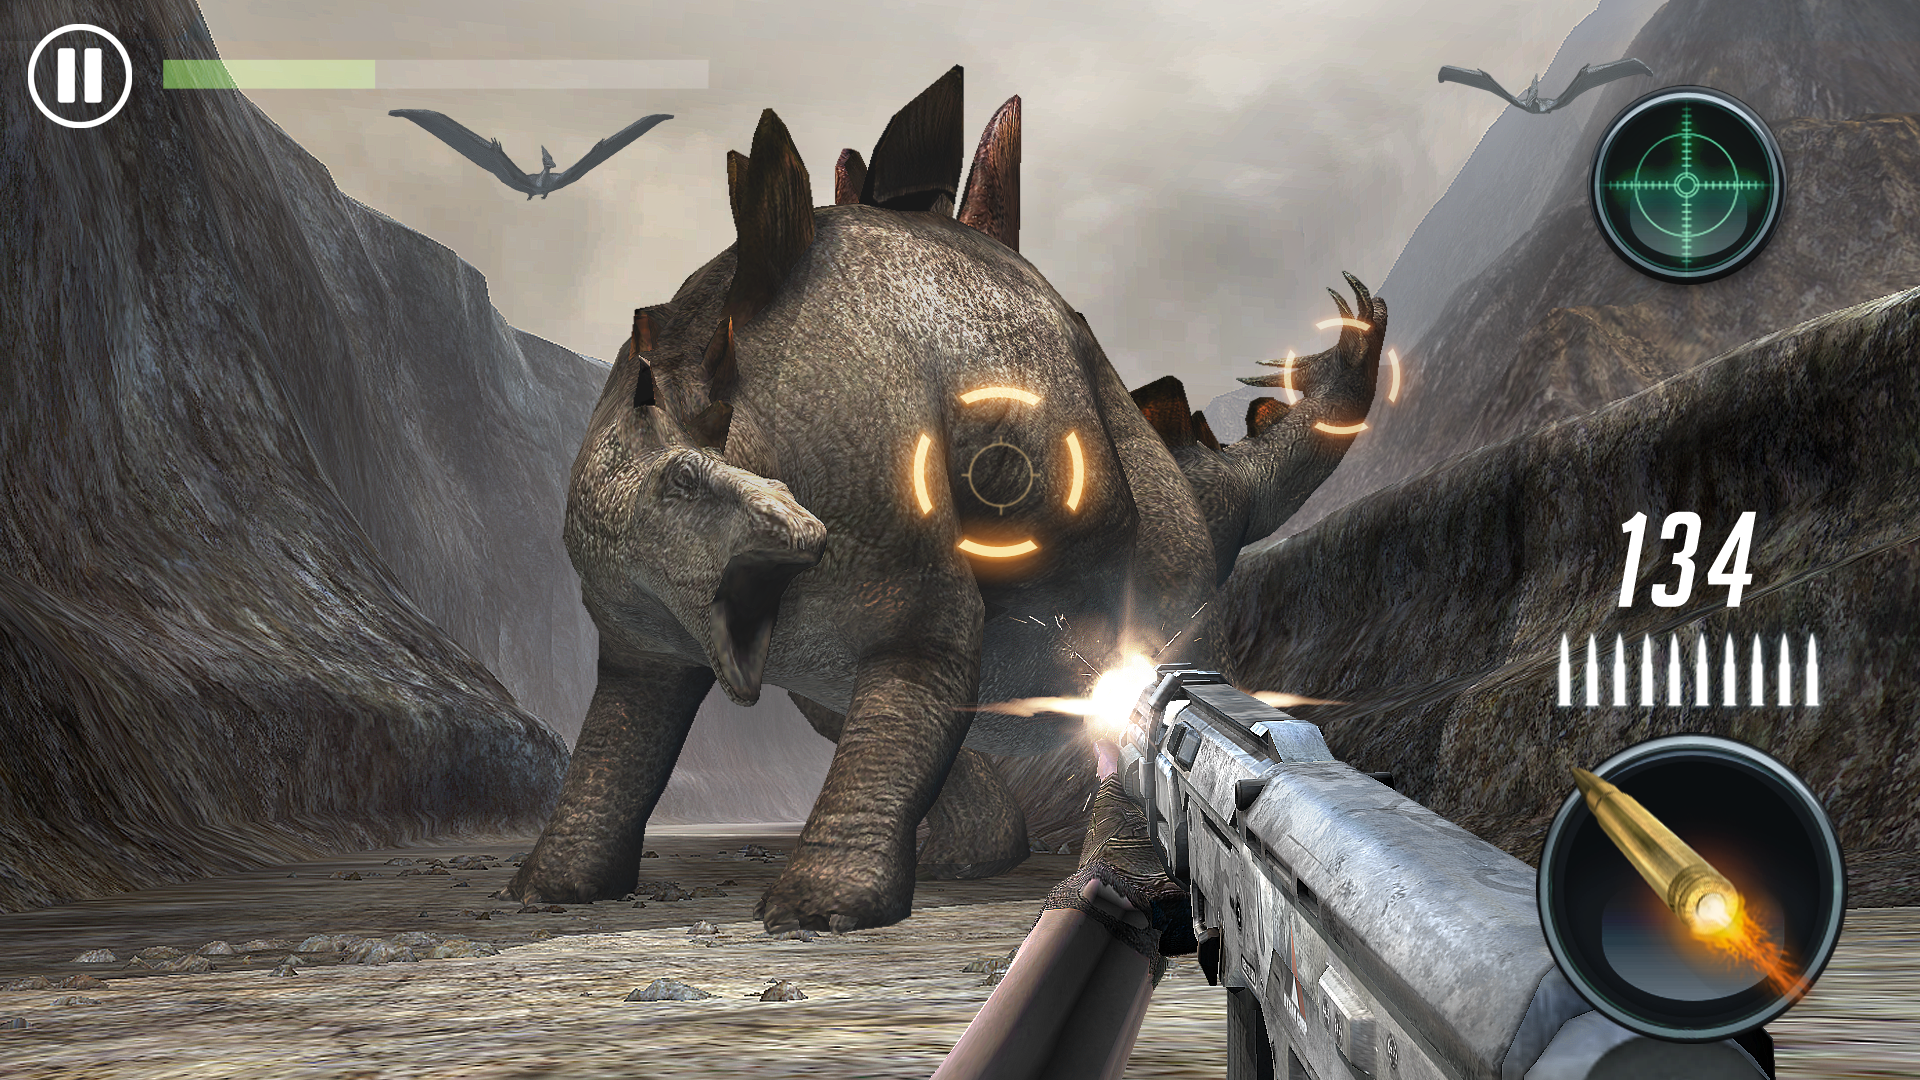 JURASSIC MISSIONS: free offline shooting games android iOS apk